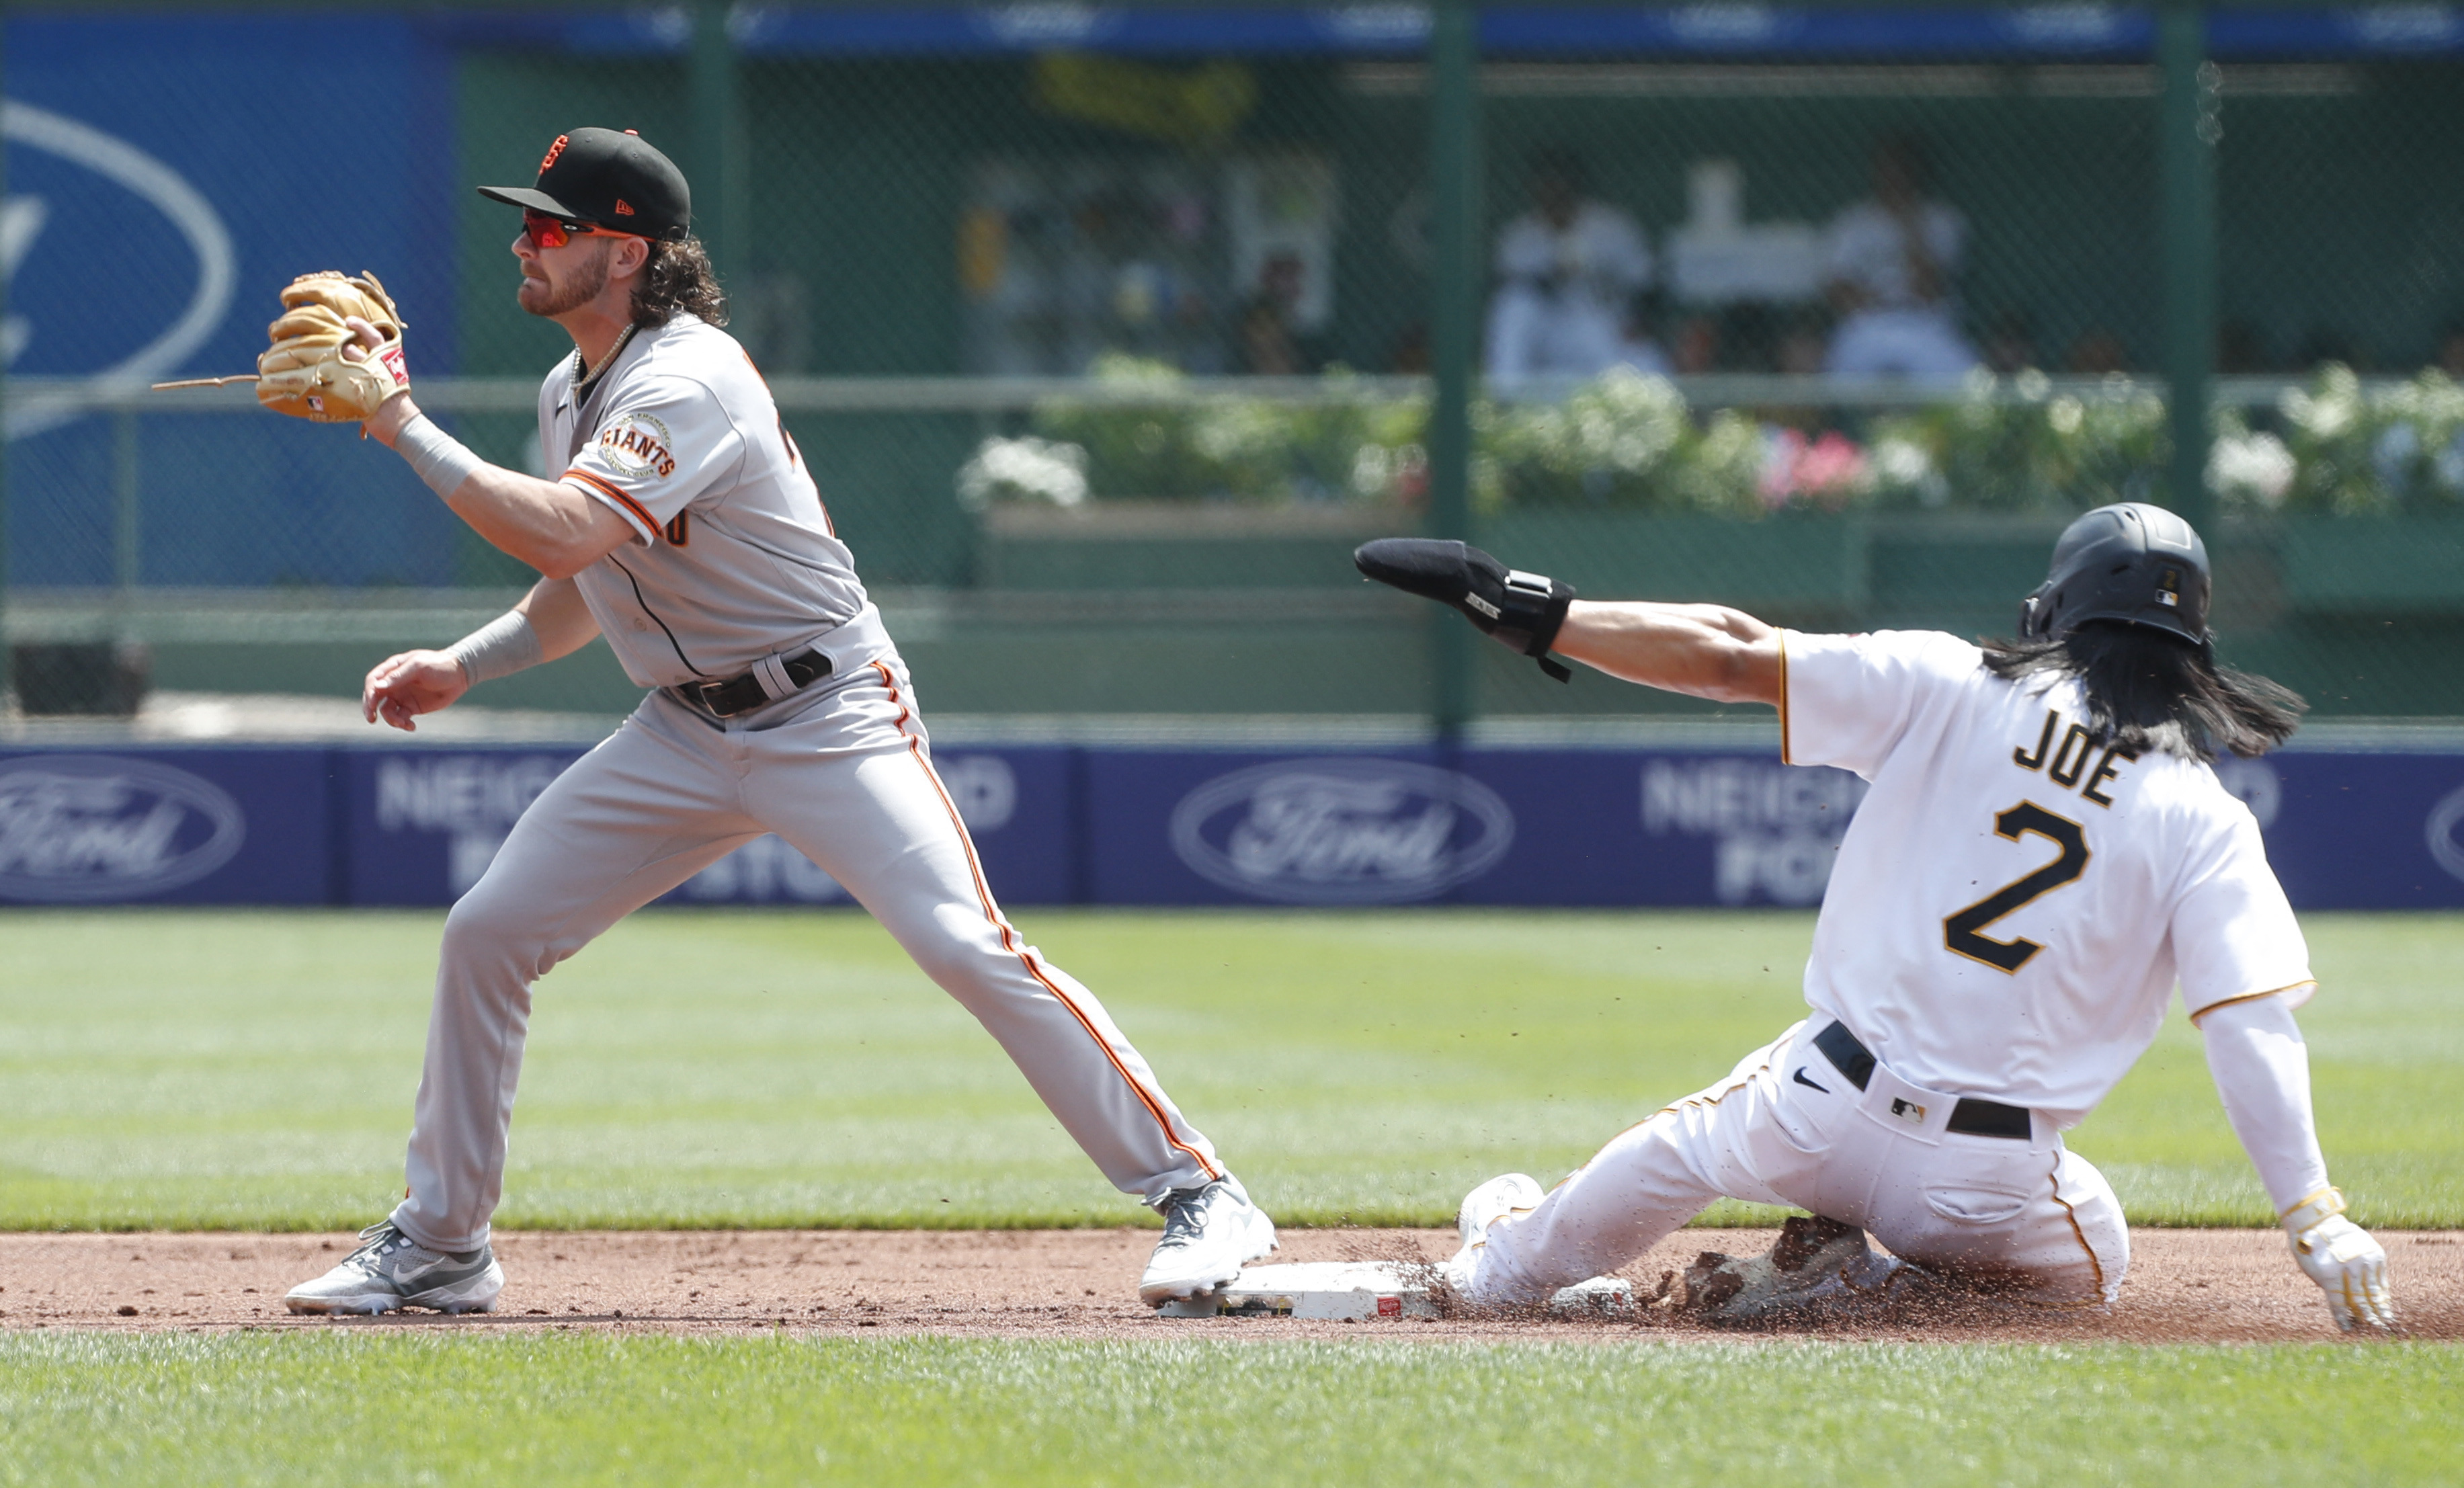 Giants score 5 runs in 10th for series sweep as Pirates continue